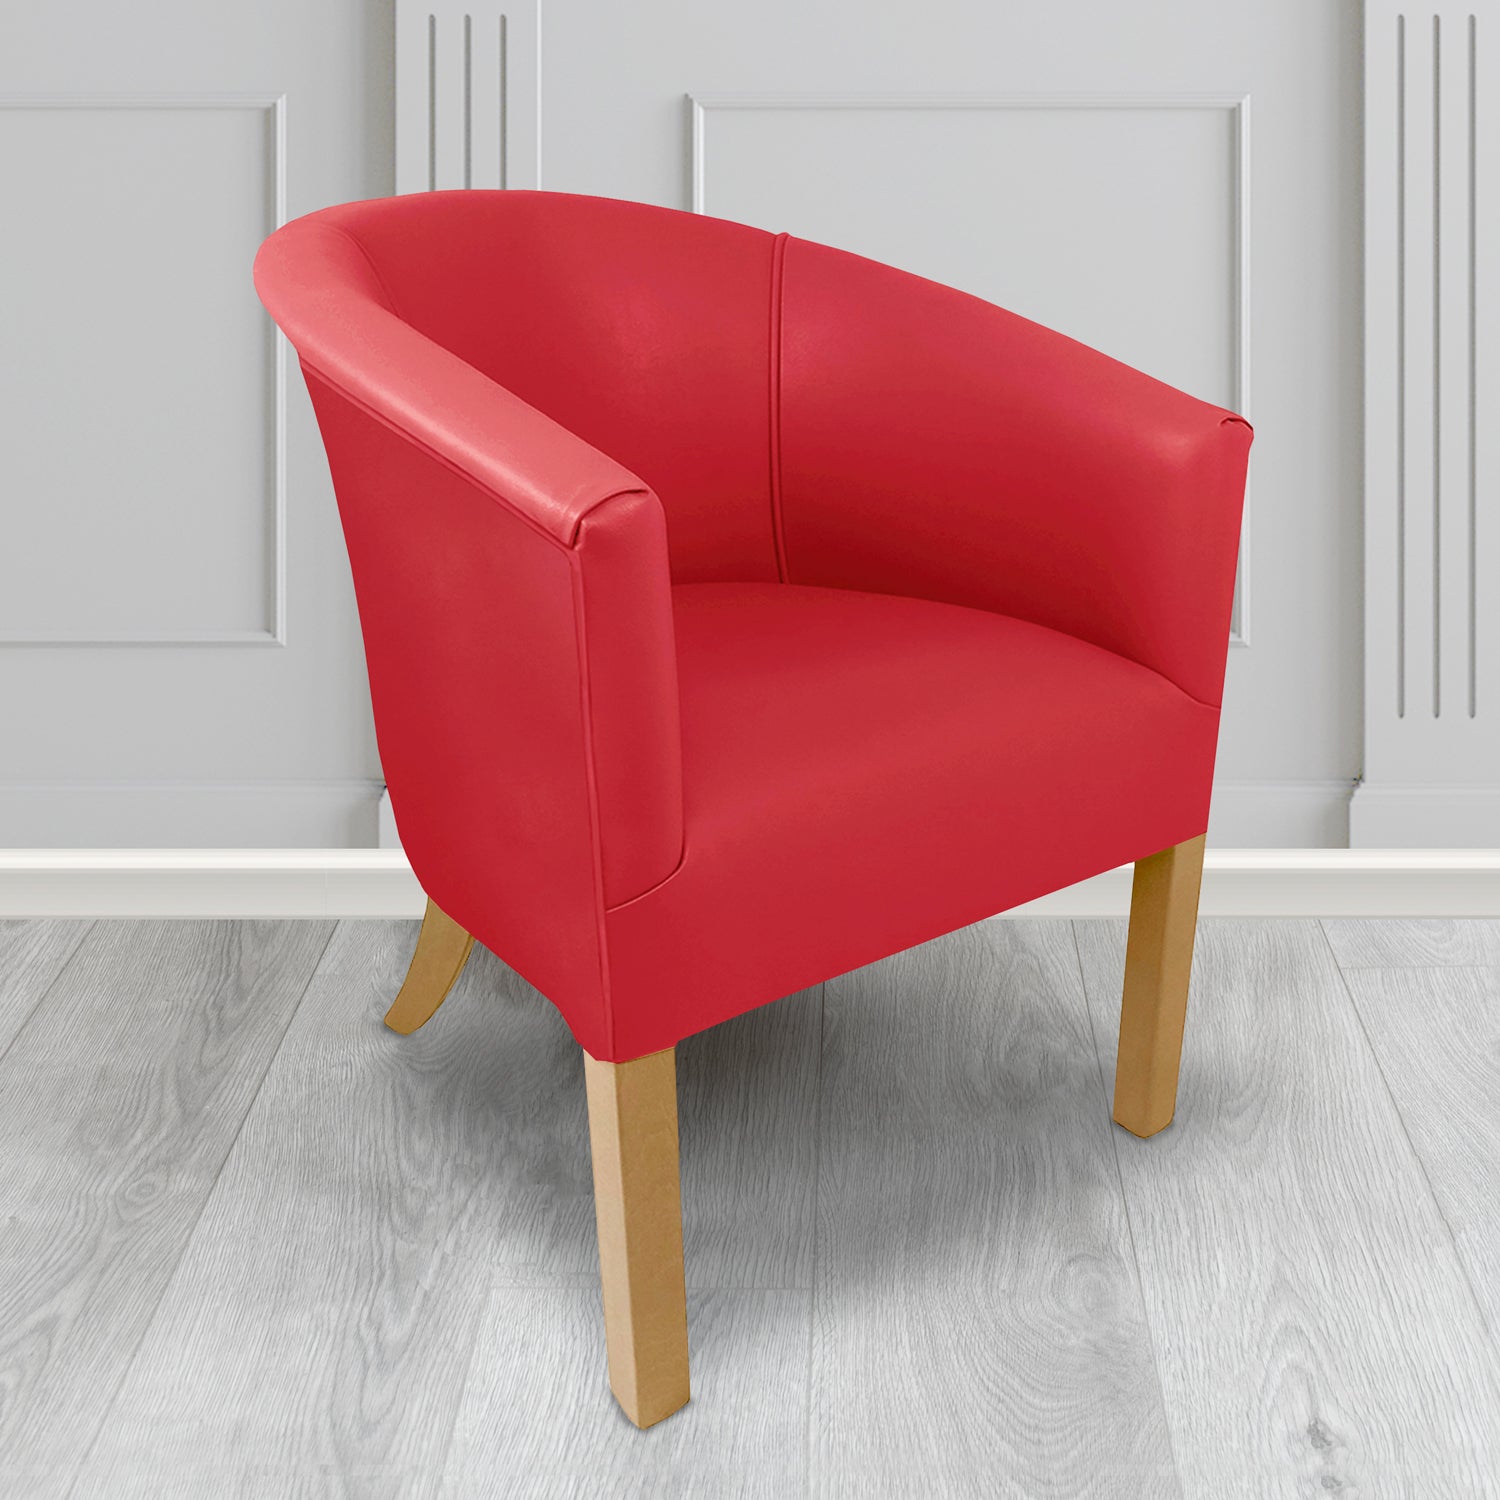 Lewisham Tub Chair in Agua Paint Pot Scarlet Crib 5 Faux Leather - Antimicrobial, Stain Resistant & Waterproof - The Tub Chair Shop